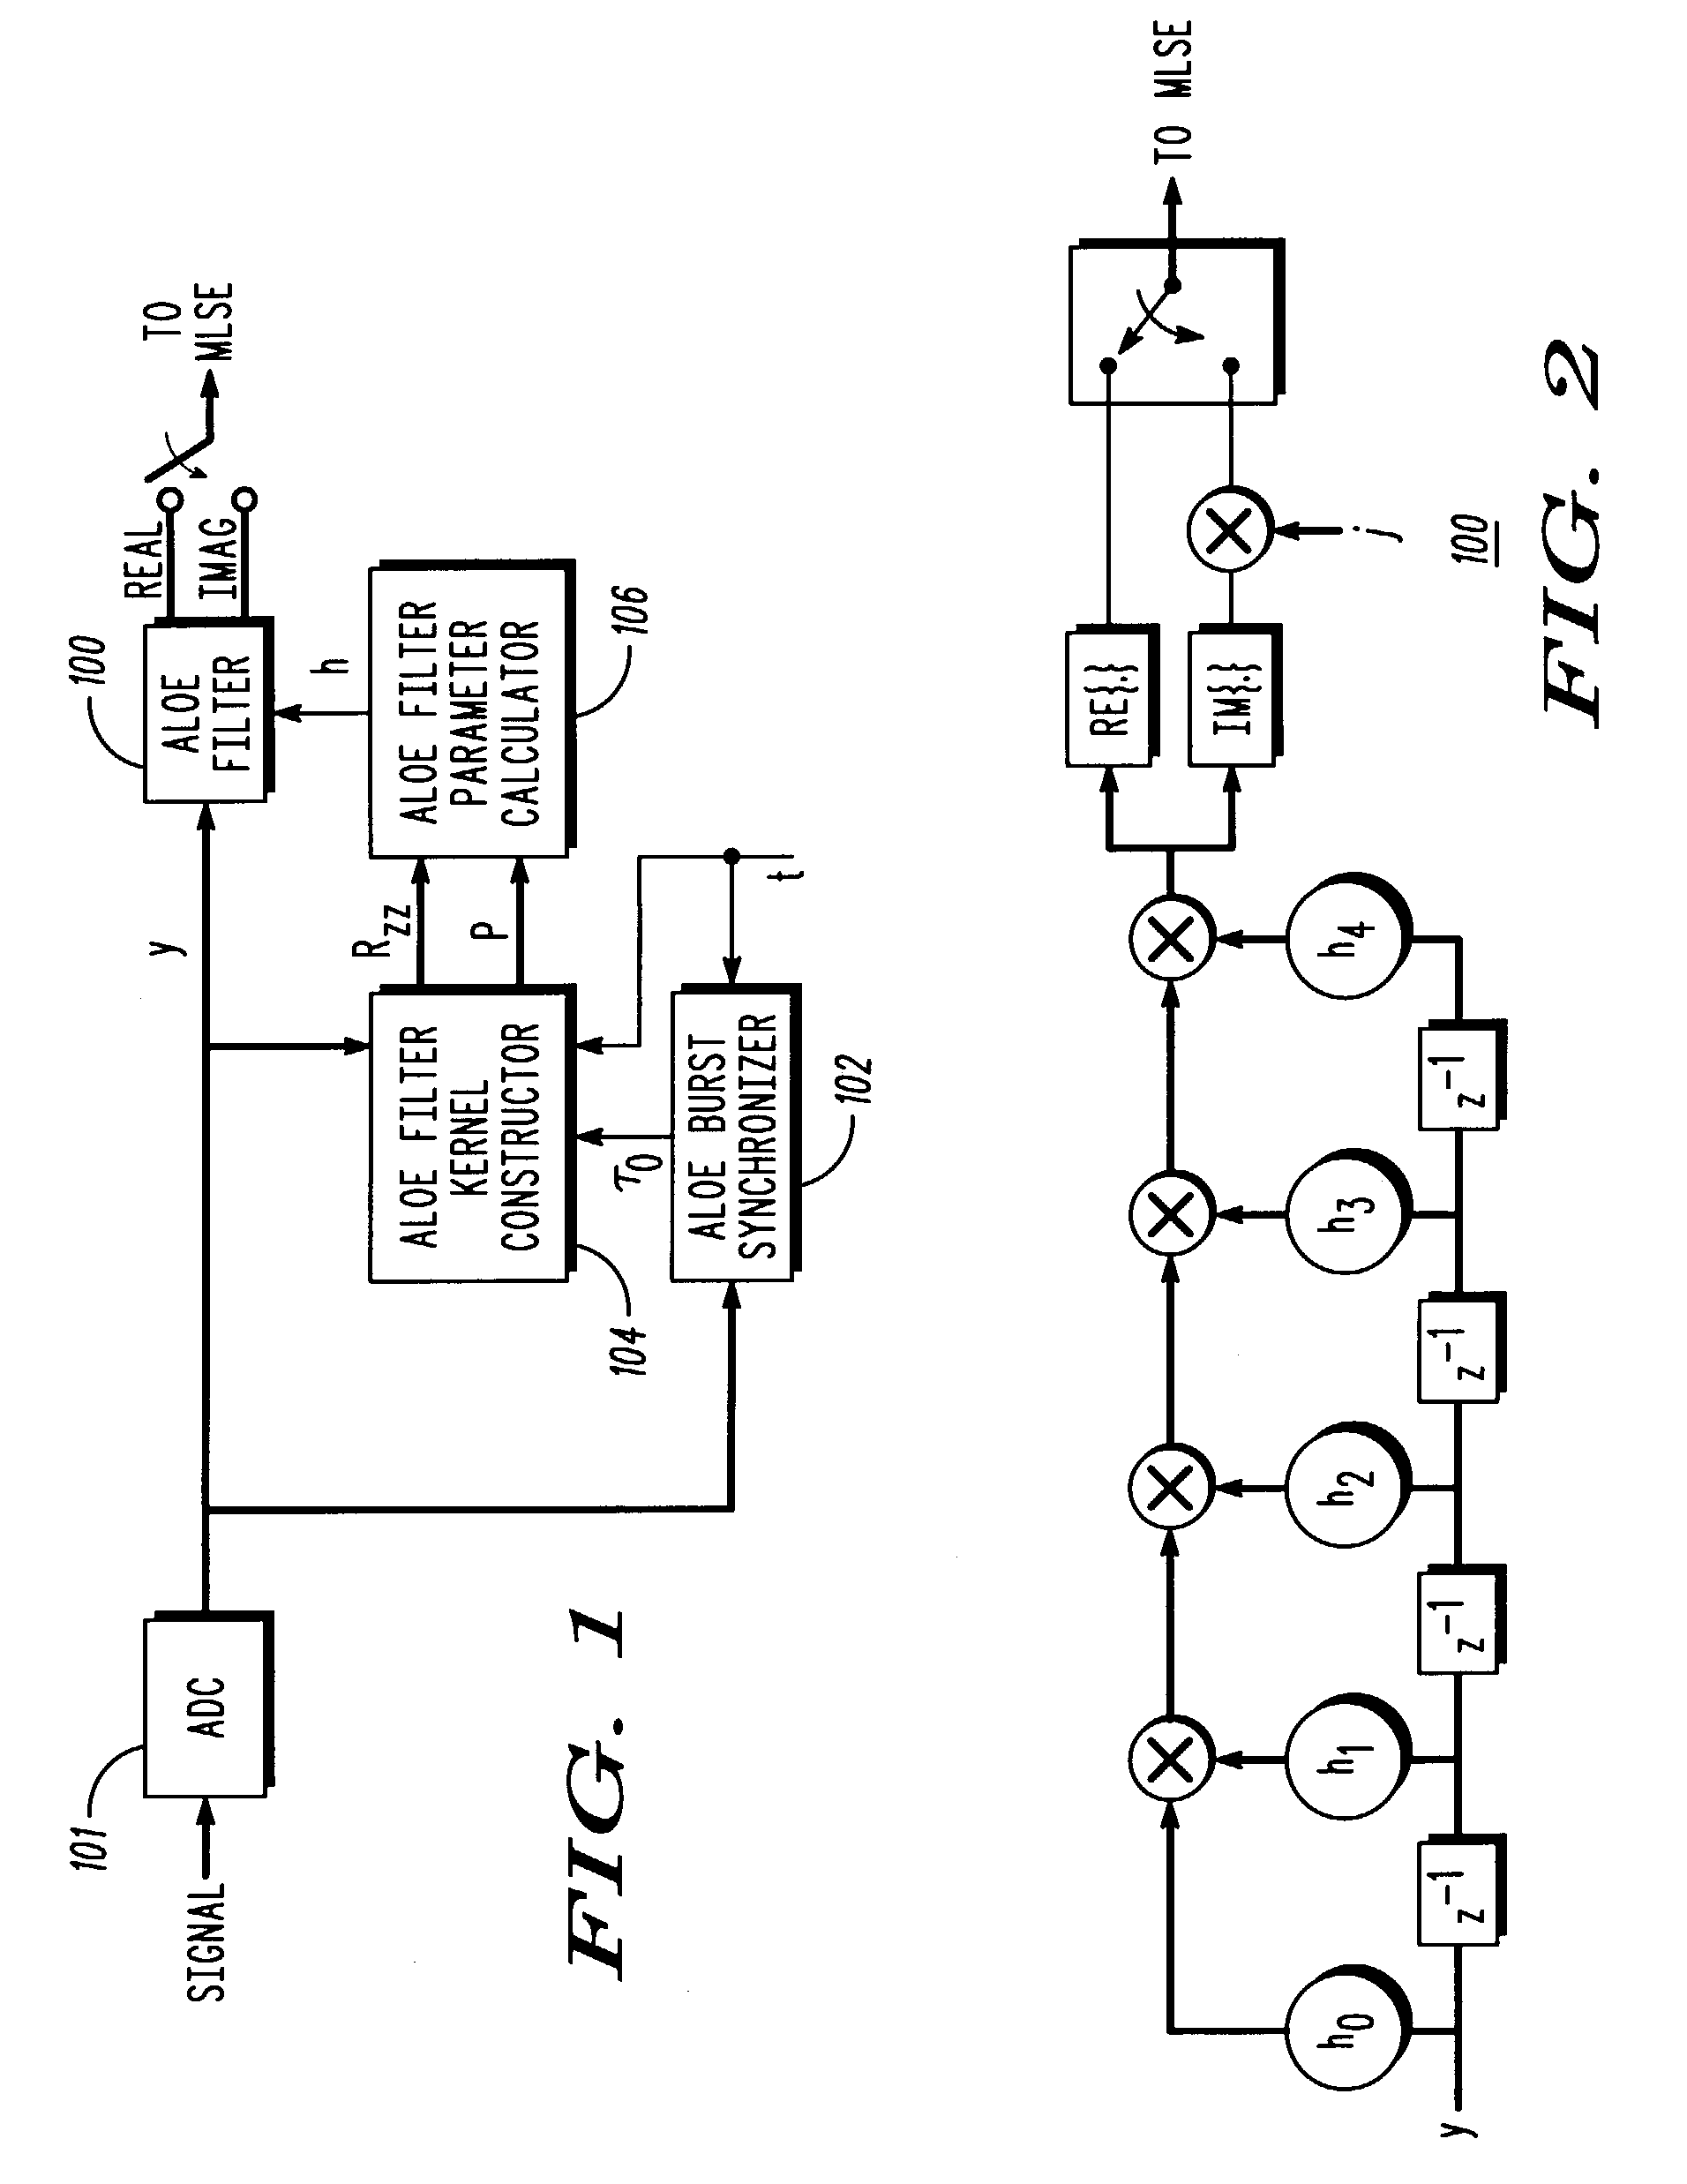 Reducing interference in a GSM communication system